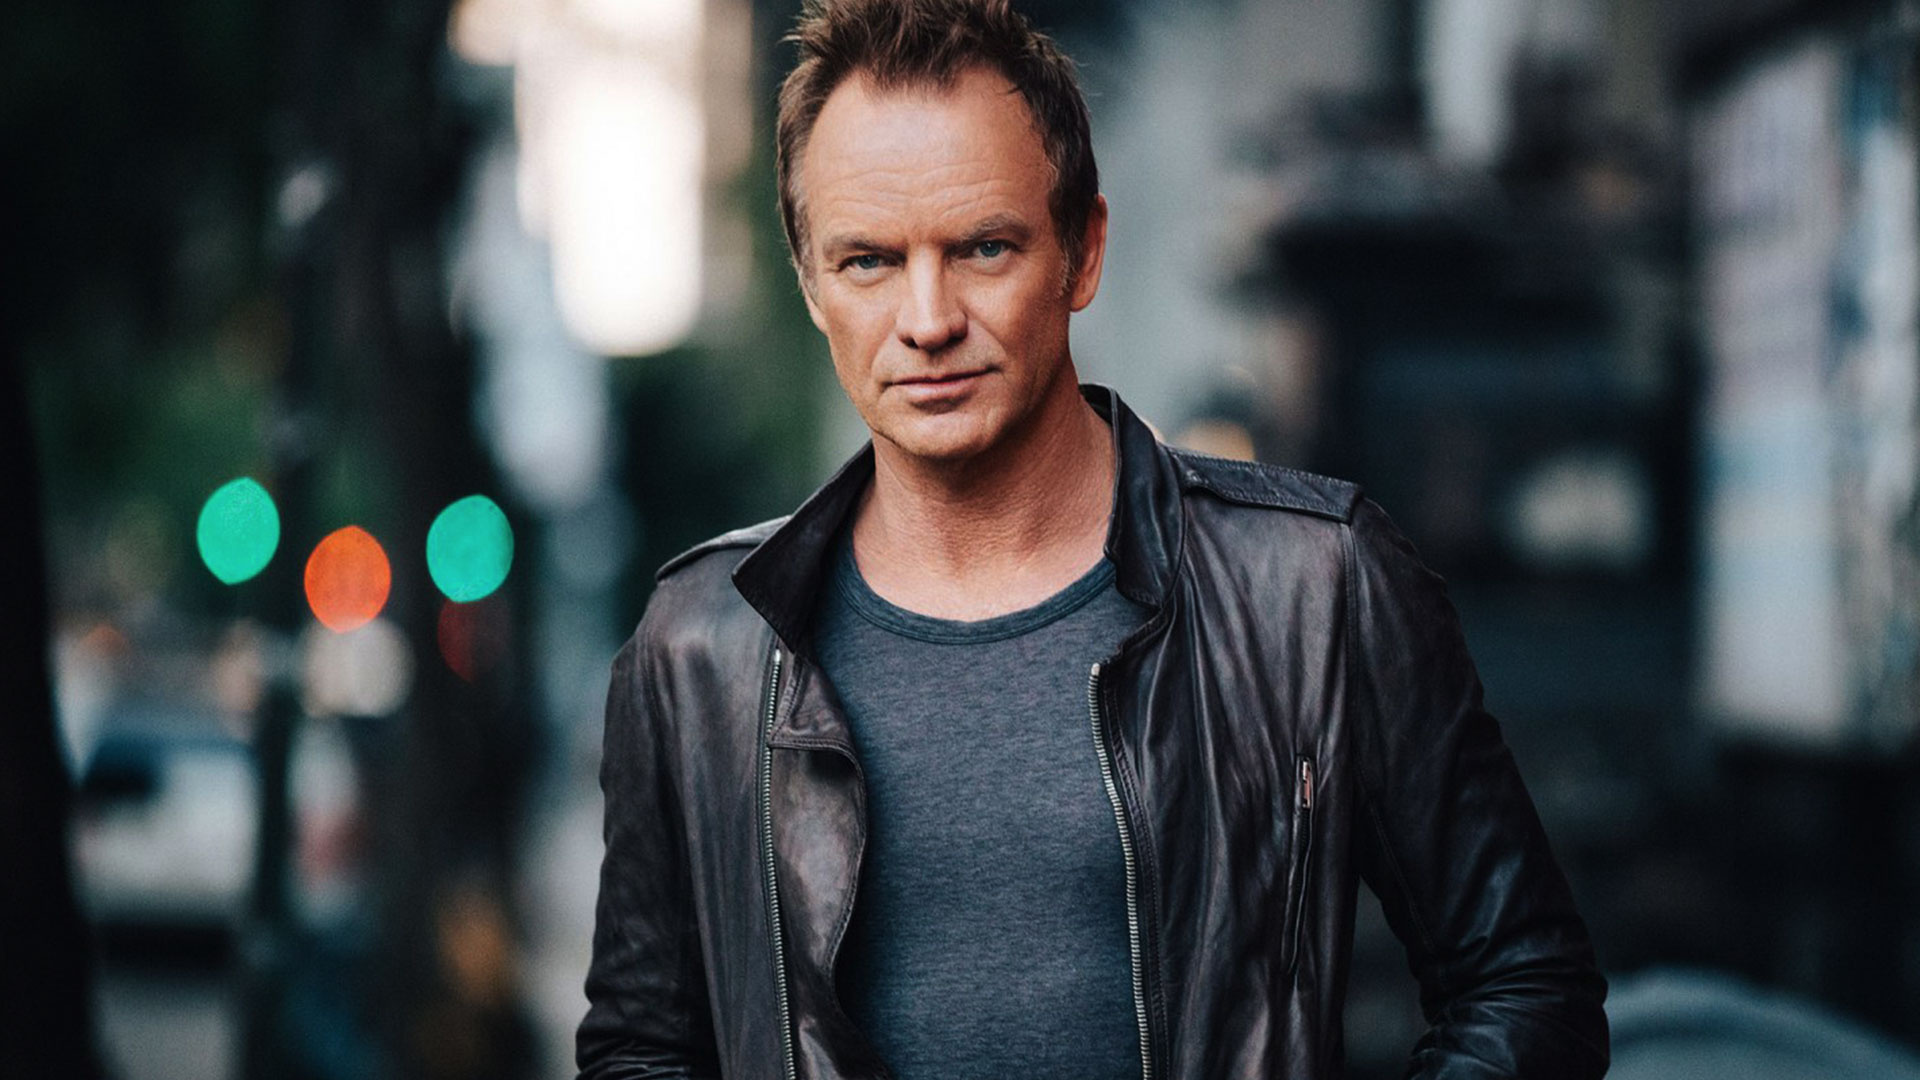 19+ Sting Musician Wallpapers 1920x1080